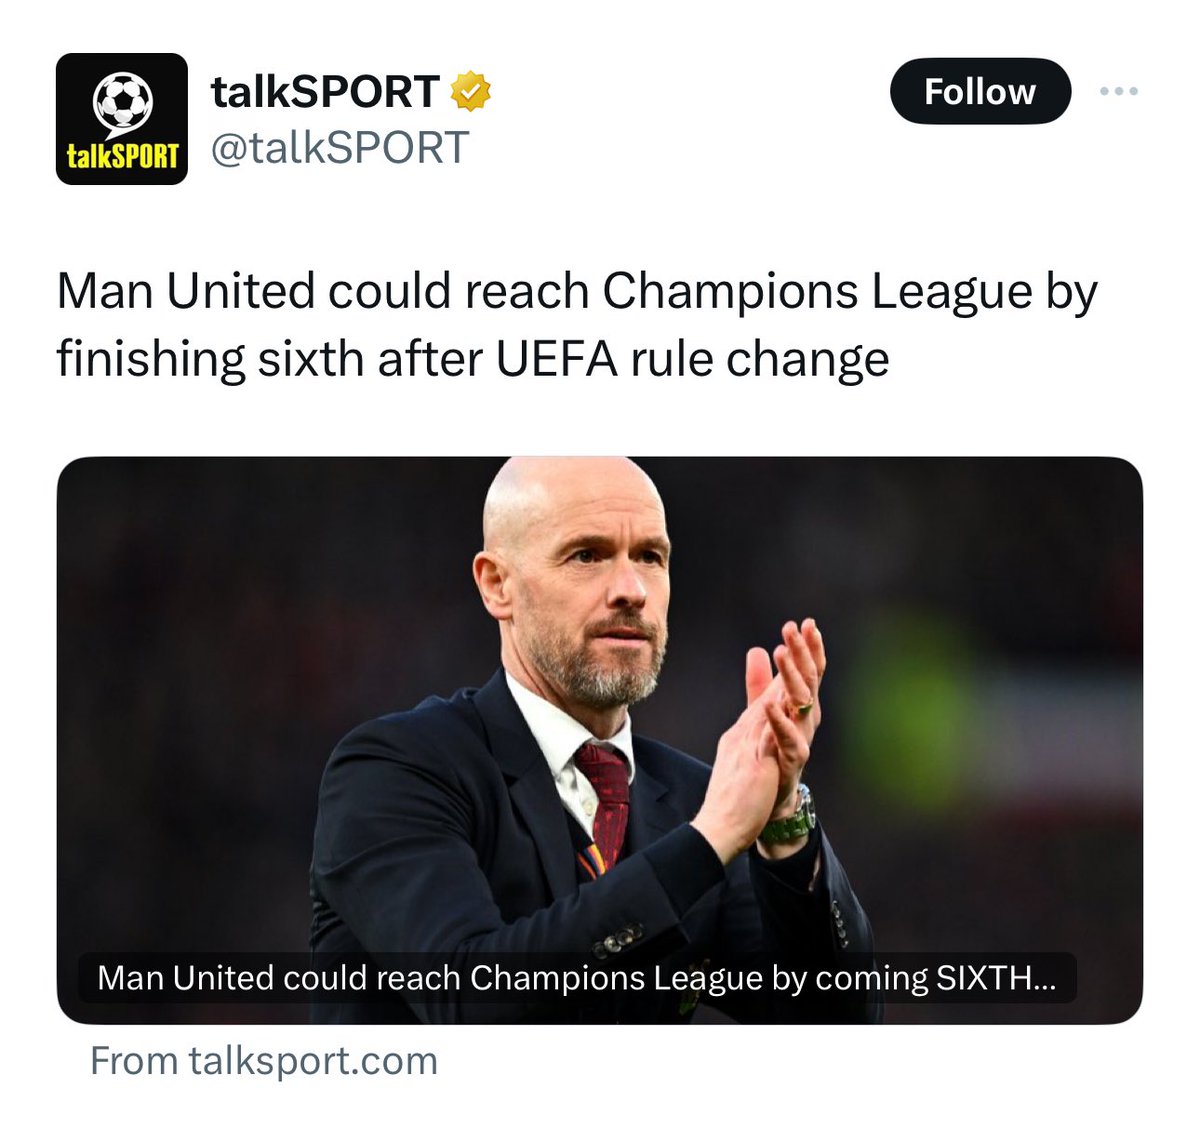 This isn’t happening. West Ham would need to win the Europa and finish 5th for 6th place to become a CL place. They’re currently 12 points off top 5.